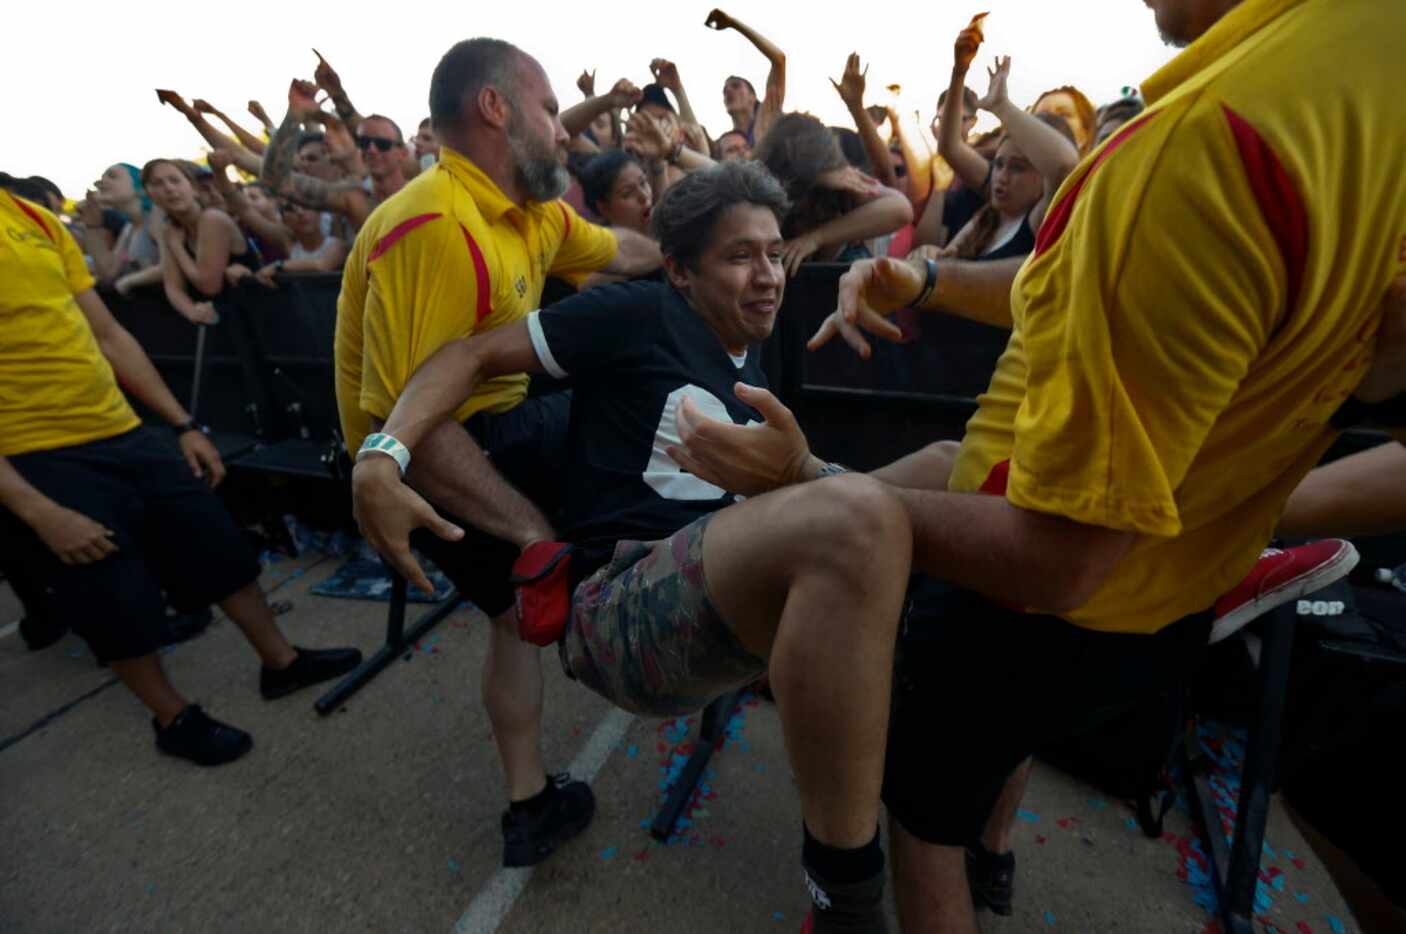 Victor Lopez lands after crowd surfing during Vans Warped Tour at Gexa Energy Pavilion in...